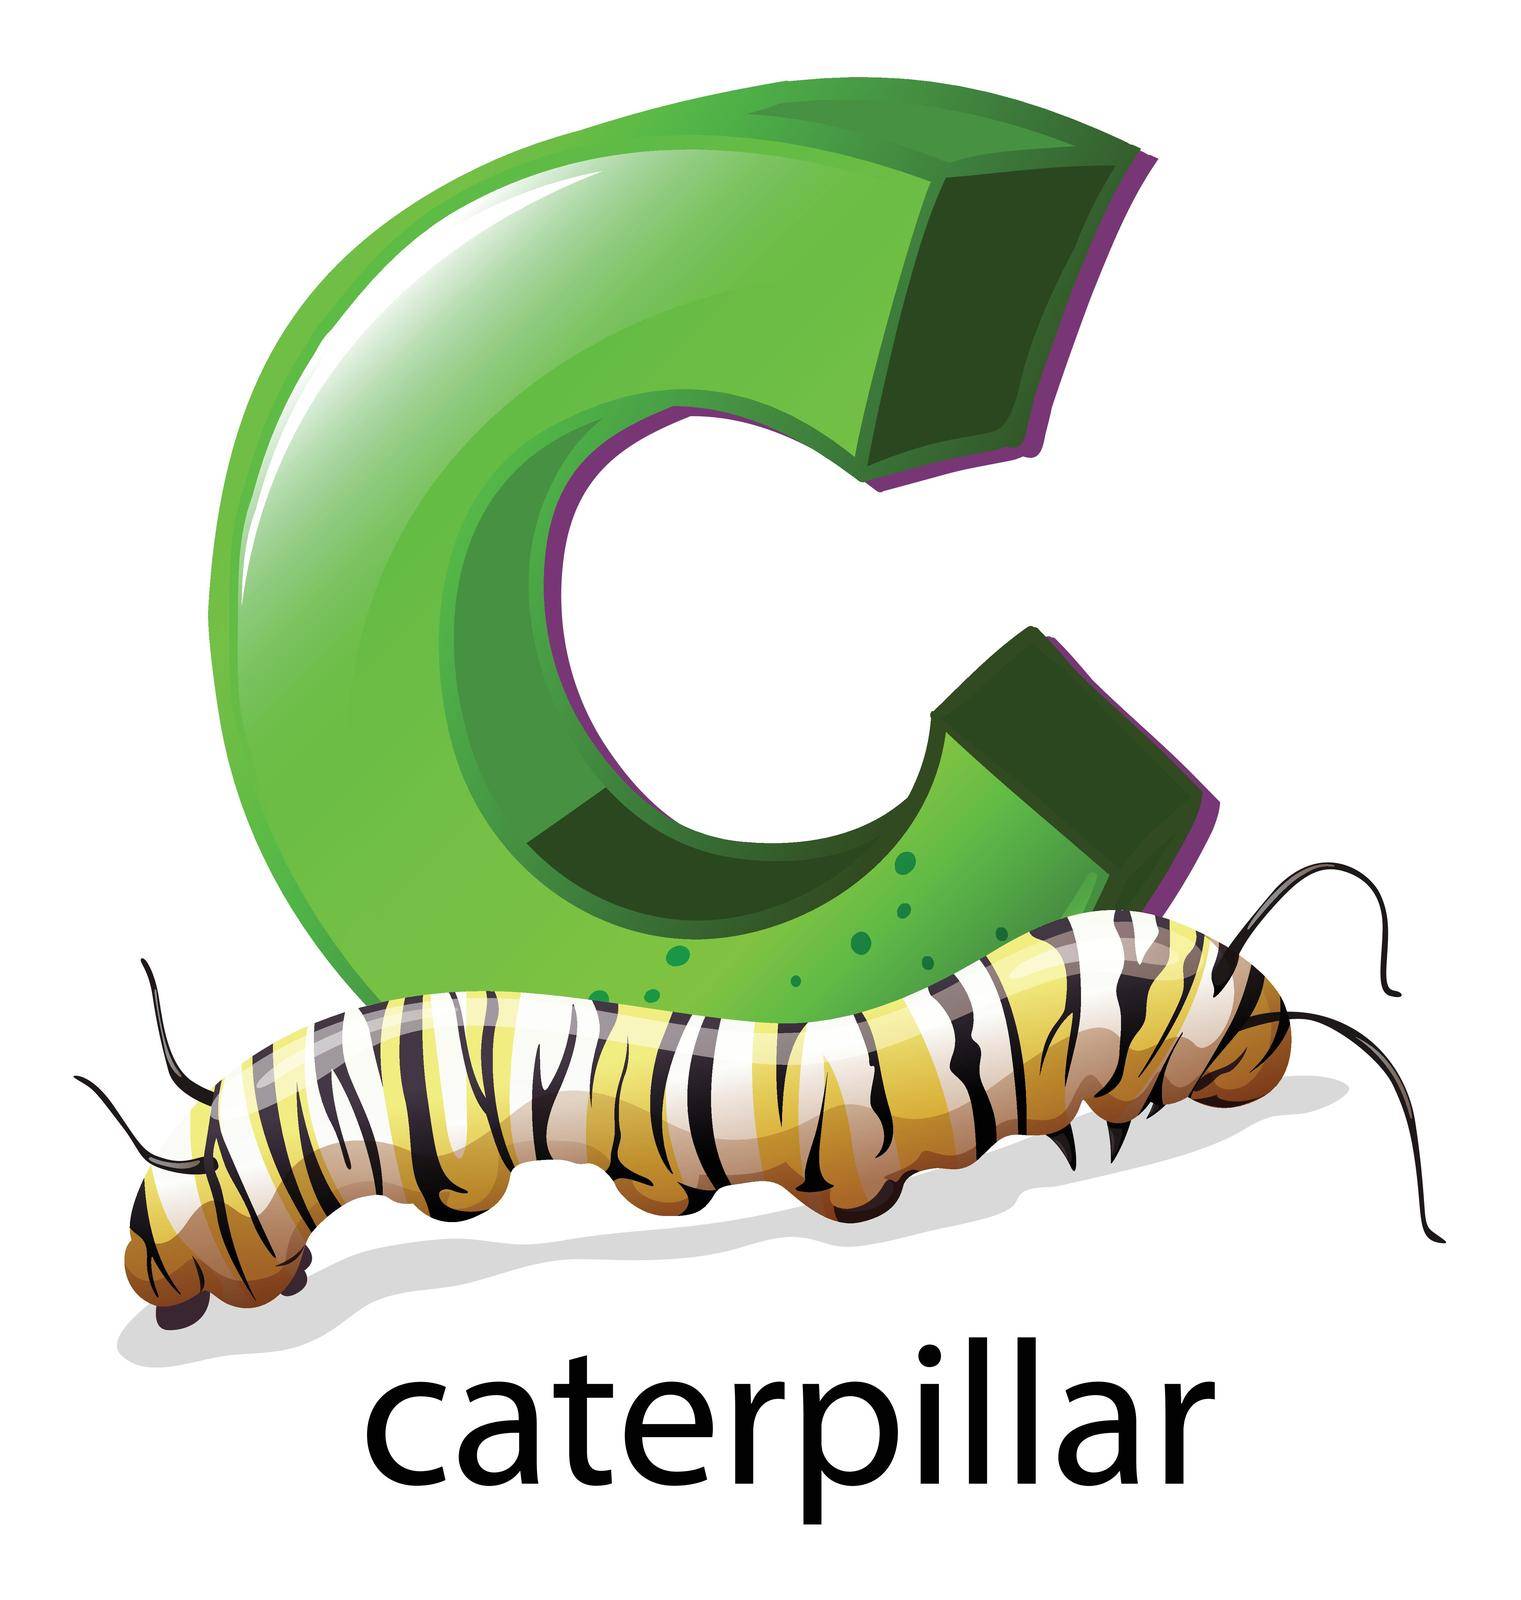 Illustration of a letter C for caterpillar on a white background